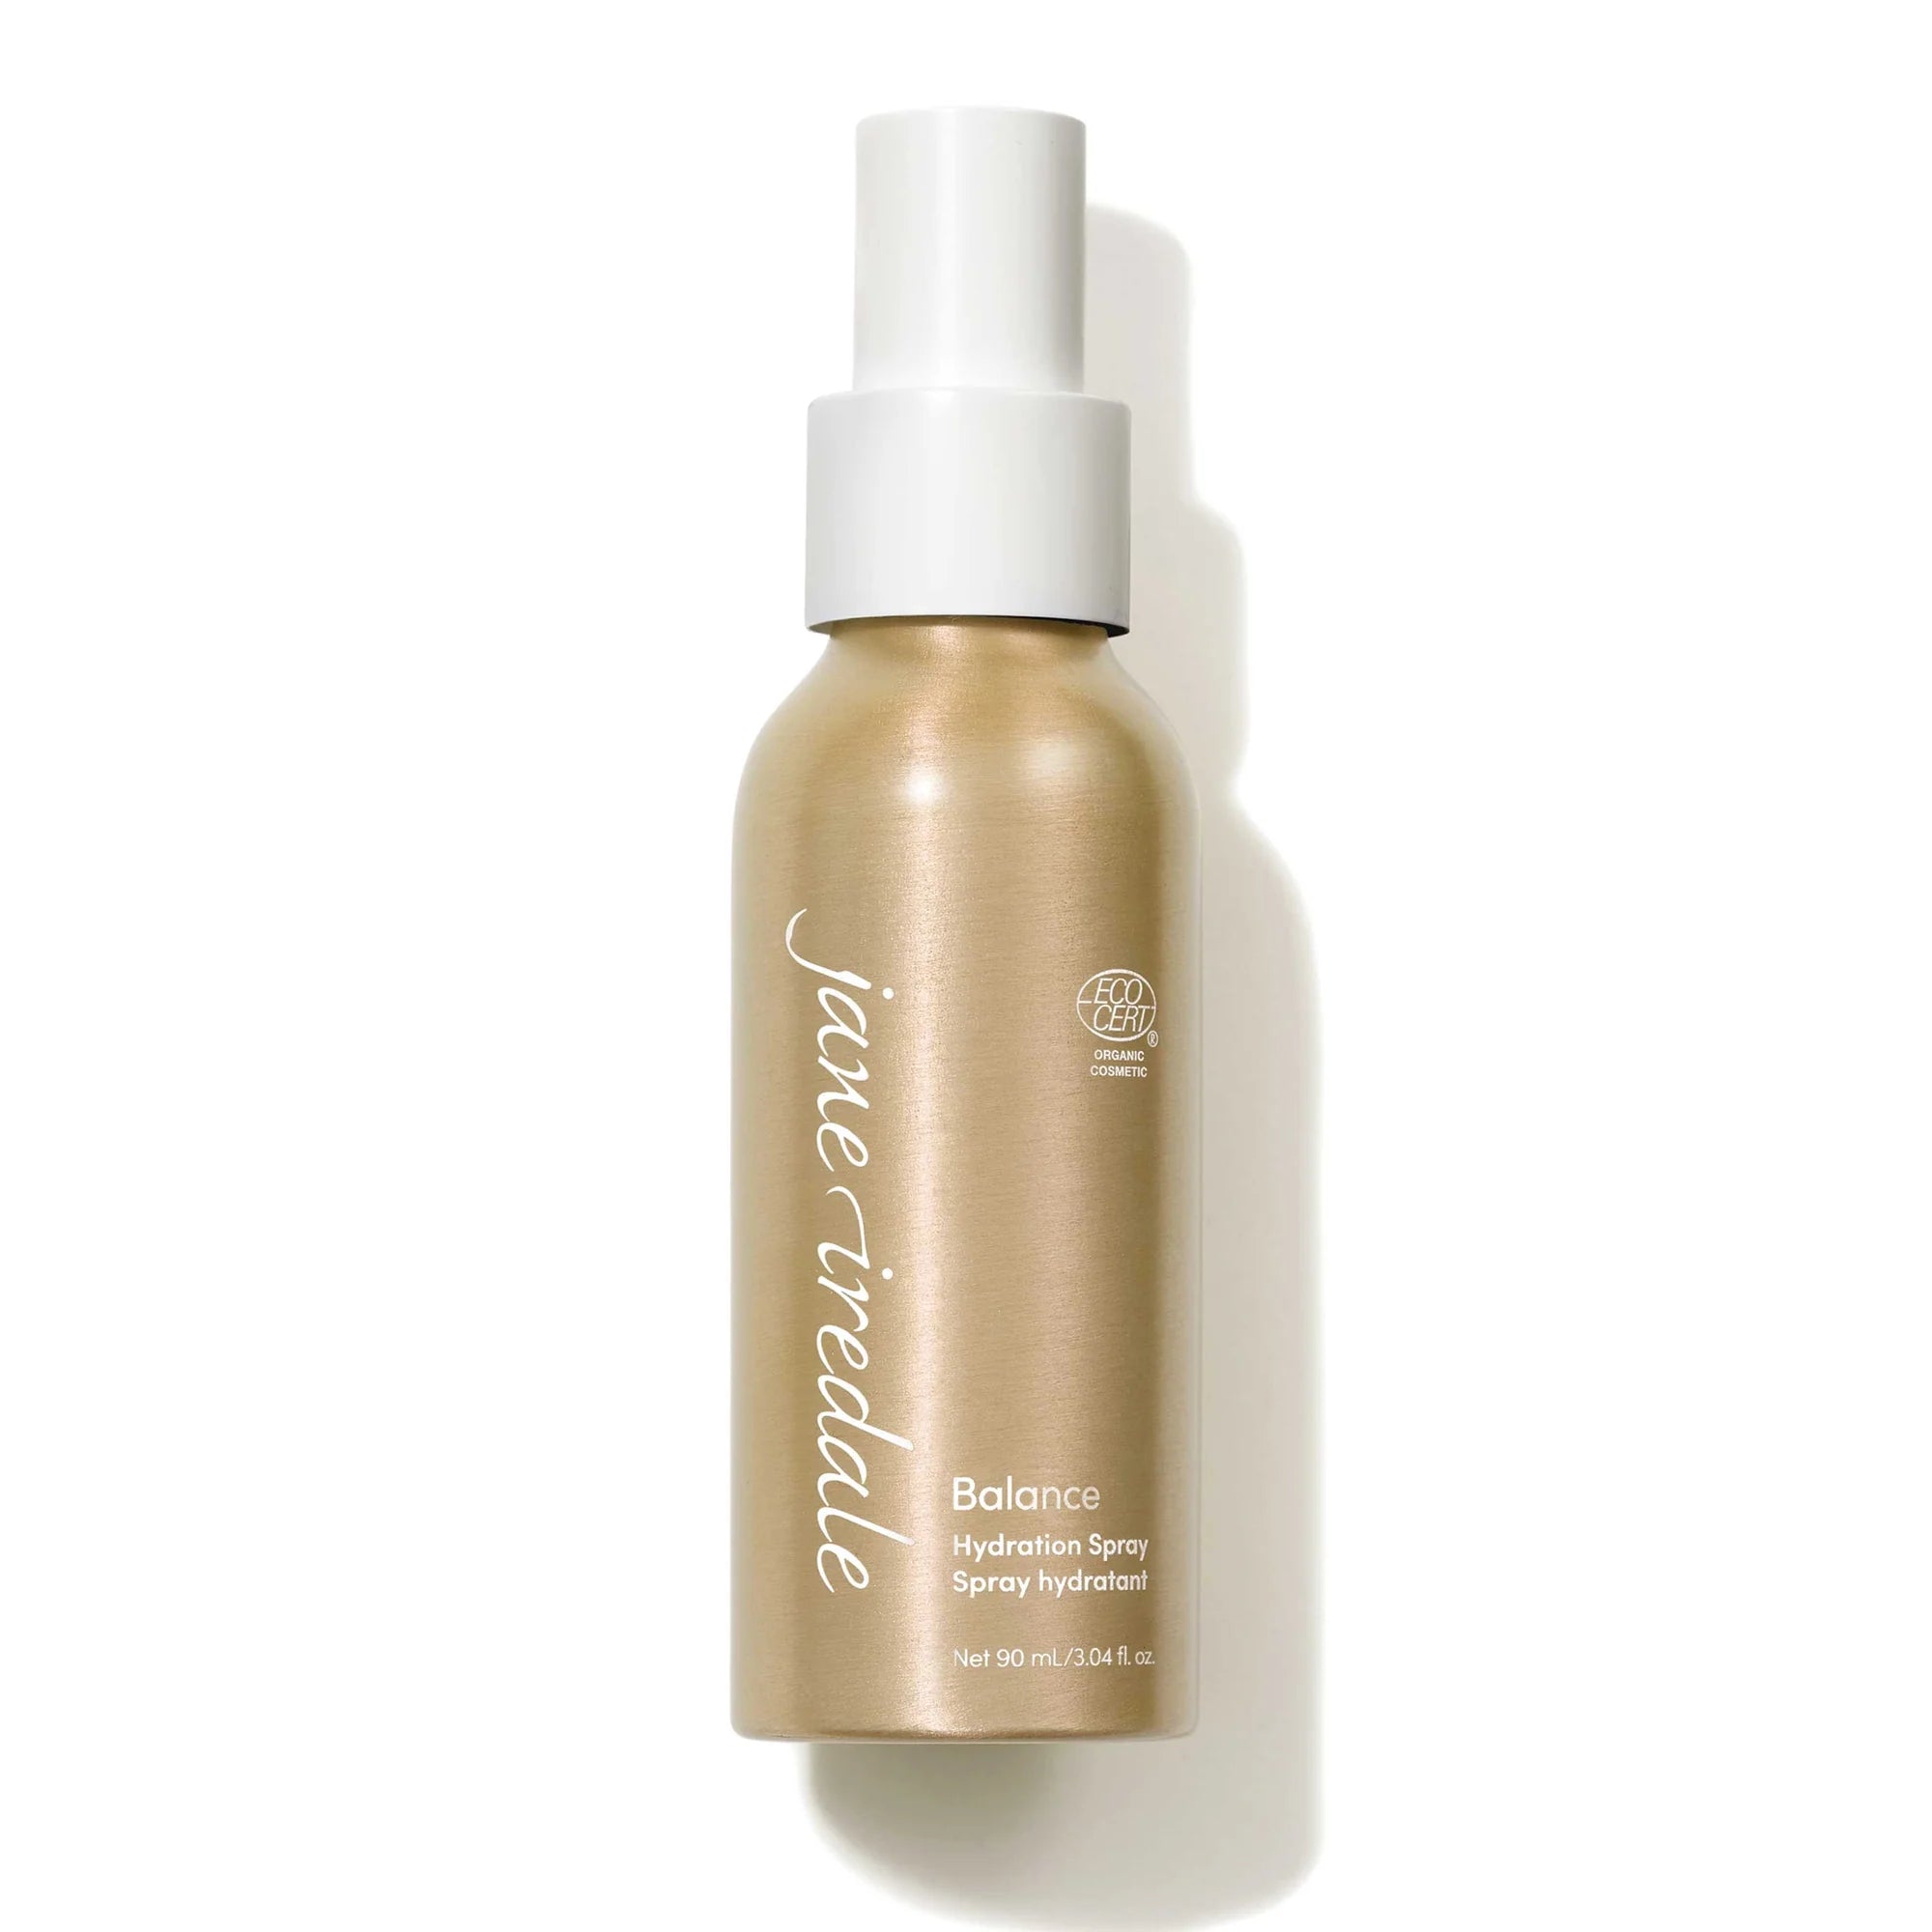 Jane Iredale's Balance™ Hydration Spray 90 ml - Use to set mineral makeup foundation for a long-lasting, smooth finish